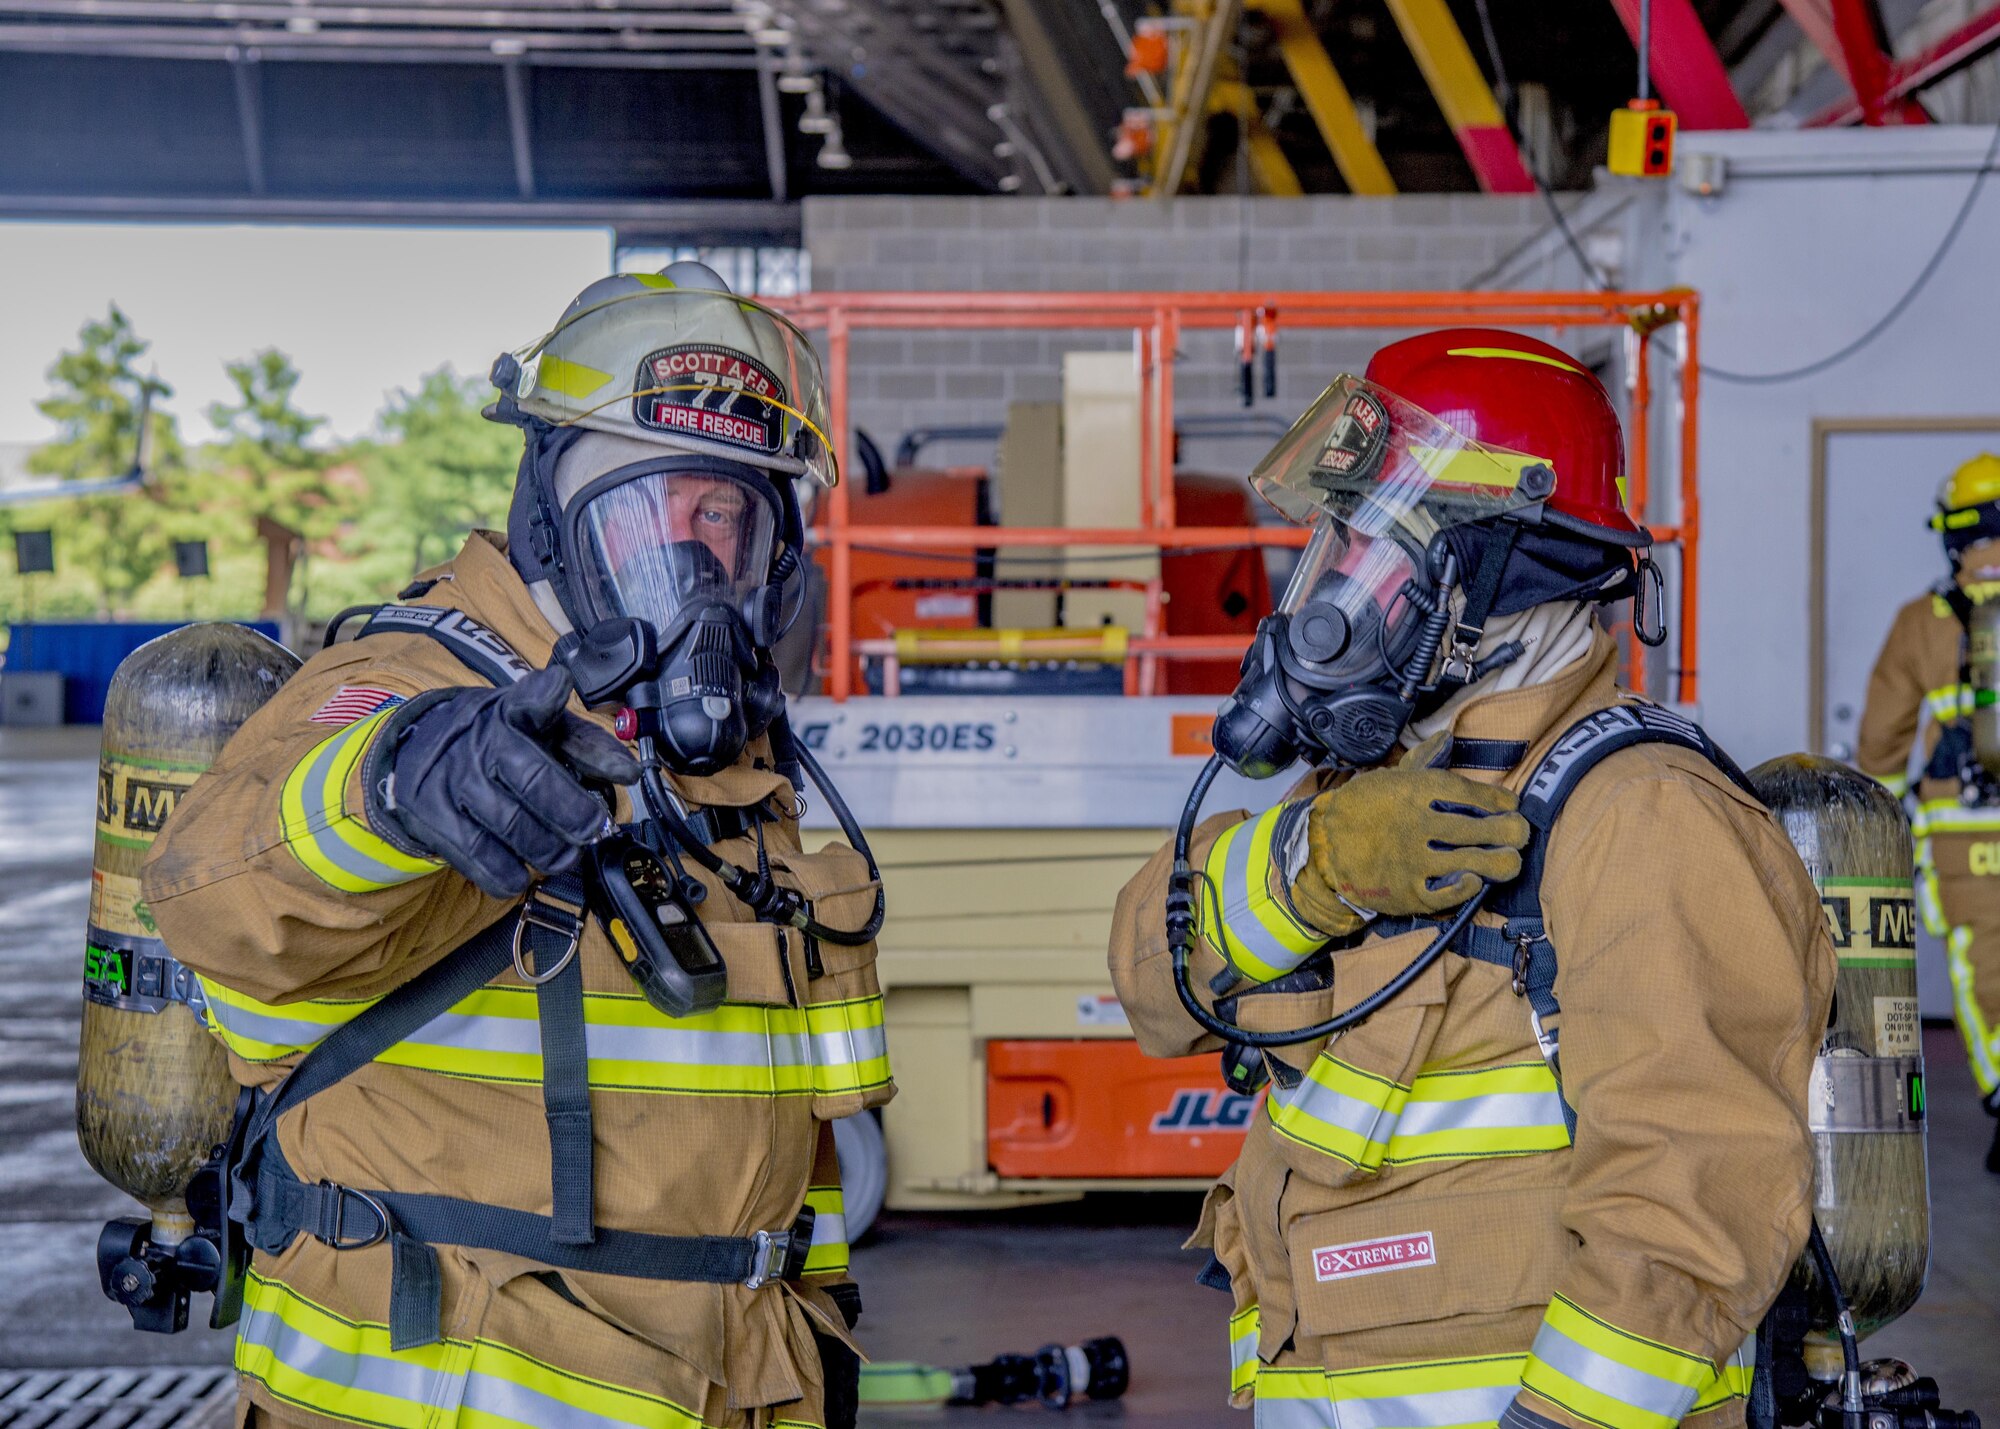 William Johnson, 375th Civil Engineer Squadron station cheif, discusses exercise procedures during a training exercise at Scott Air Force Base, Ill. on June 22, 2017. The exercise was part of the unit's Airport Rescue and Fire Fighting's training which tests their ability to arrive on scene, fight fires, and provide a rescue path as well as recover or rescue personnel. (U.S. Air Force photo by Airman 1st Class Daniel Garcia)